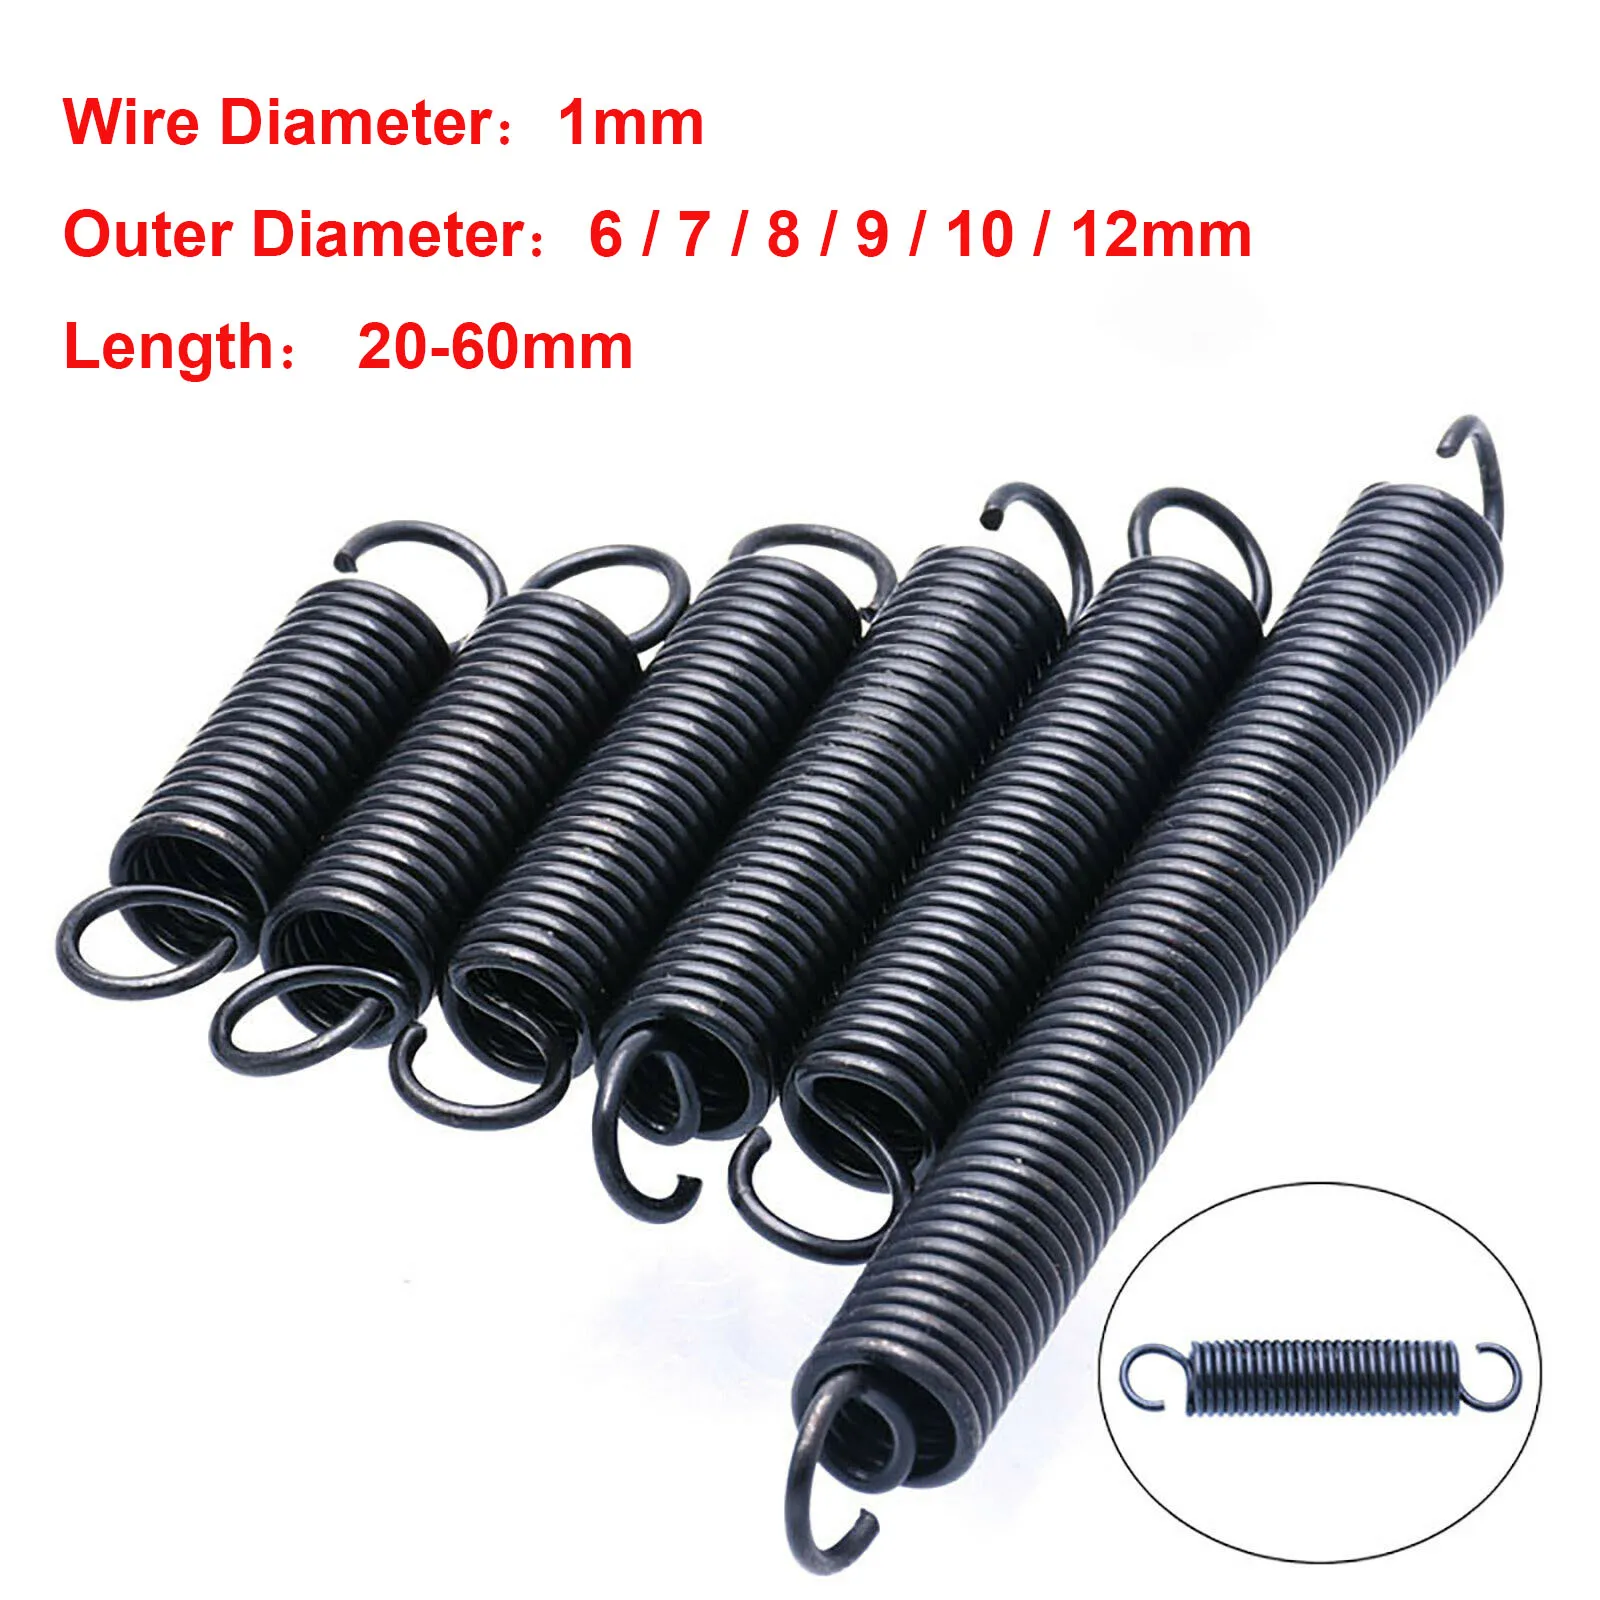 Length : 1 x 12 x 100mm 5Pcs Wire Diameter 1mm Compression Spring Hardware Accessories Outer Diameter 11mm 12mm Rust-proof and durable Lruirui-Spring Kits Tension Spring 